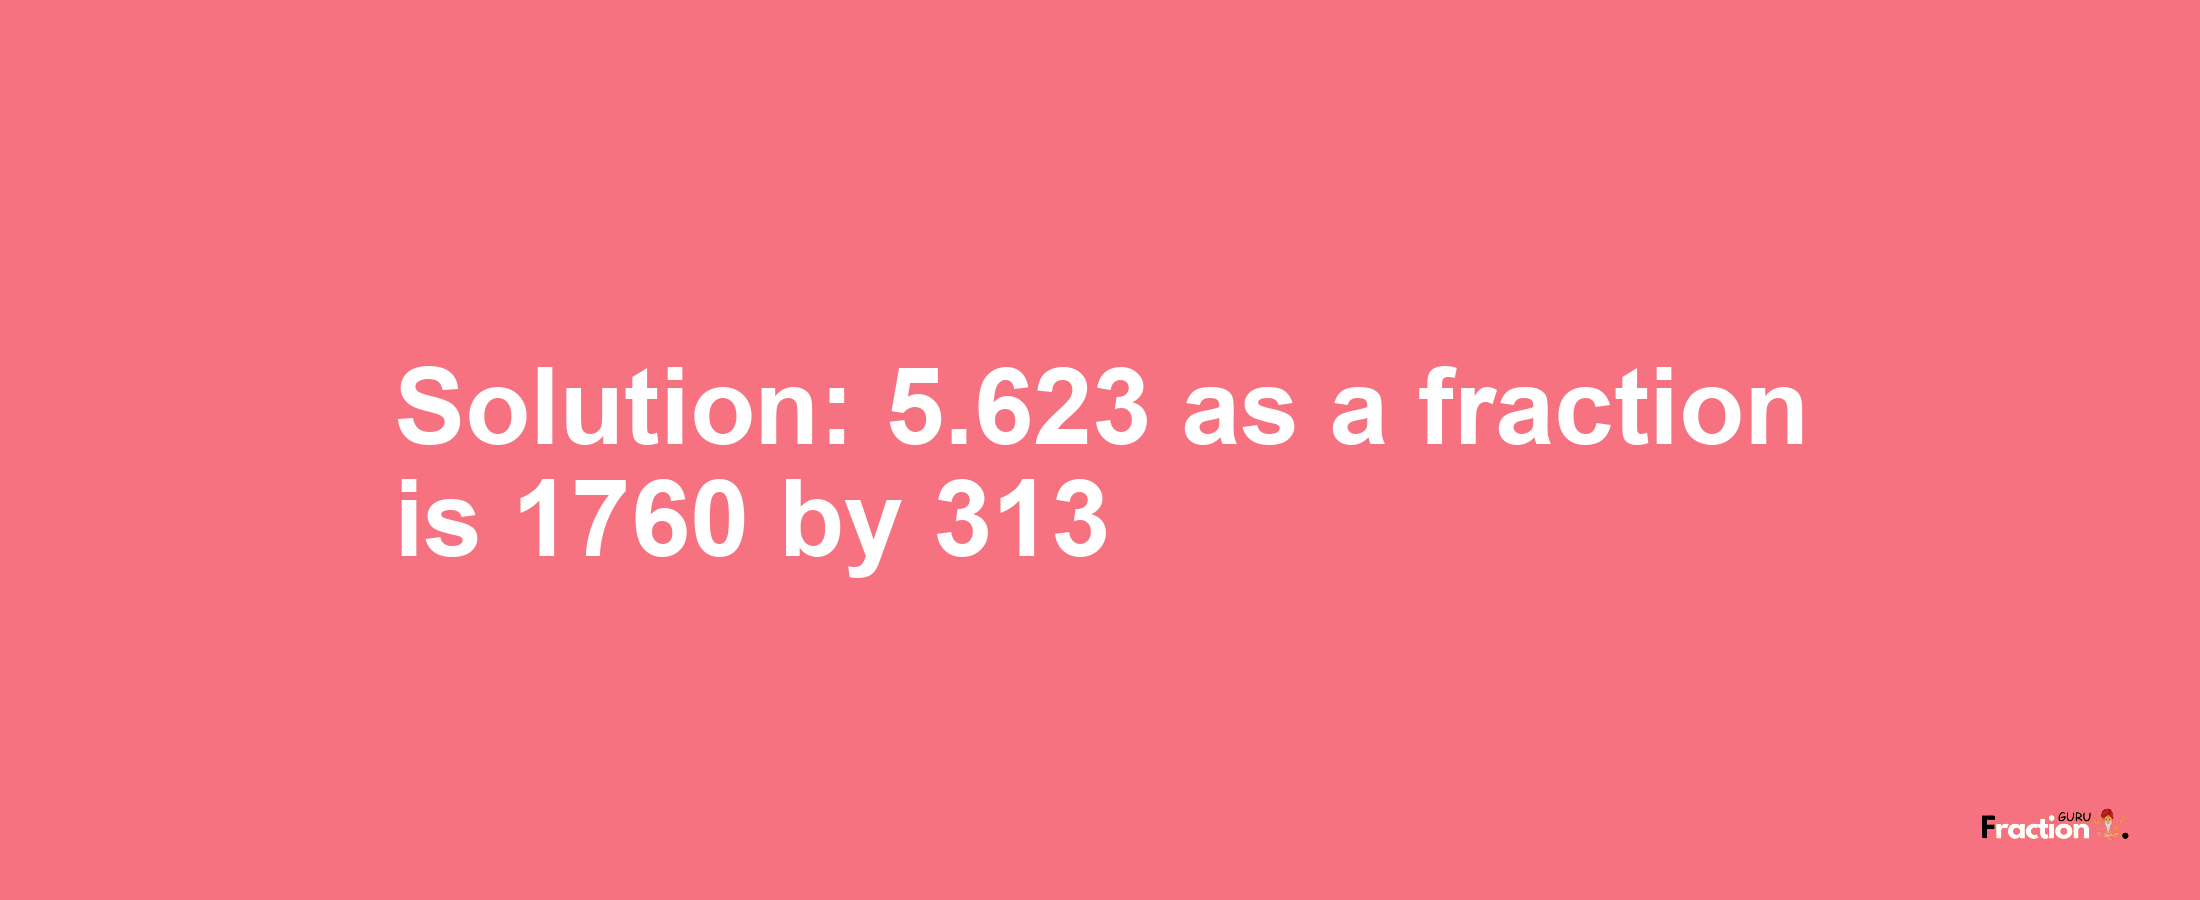 Solution:5.623 as a fraction is 1760/313